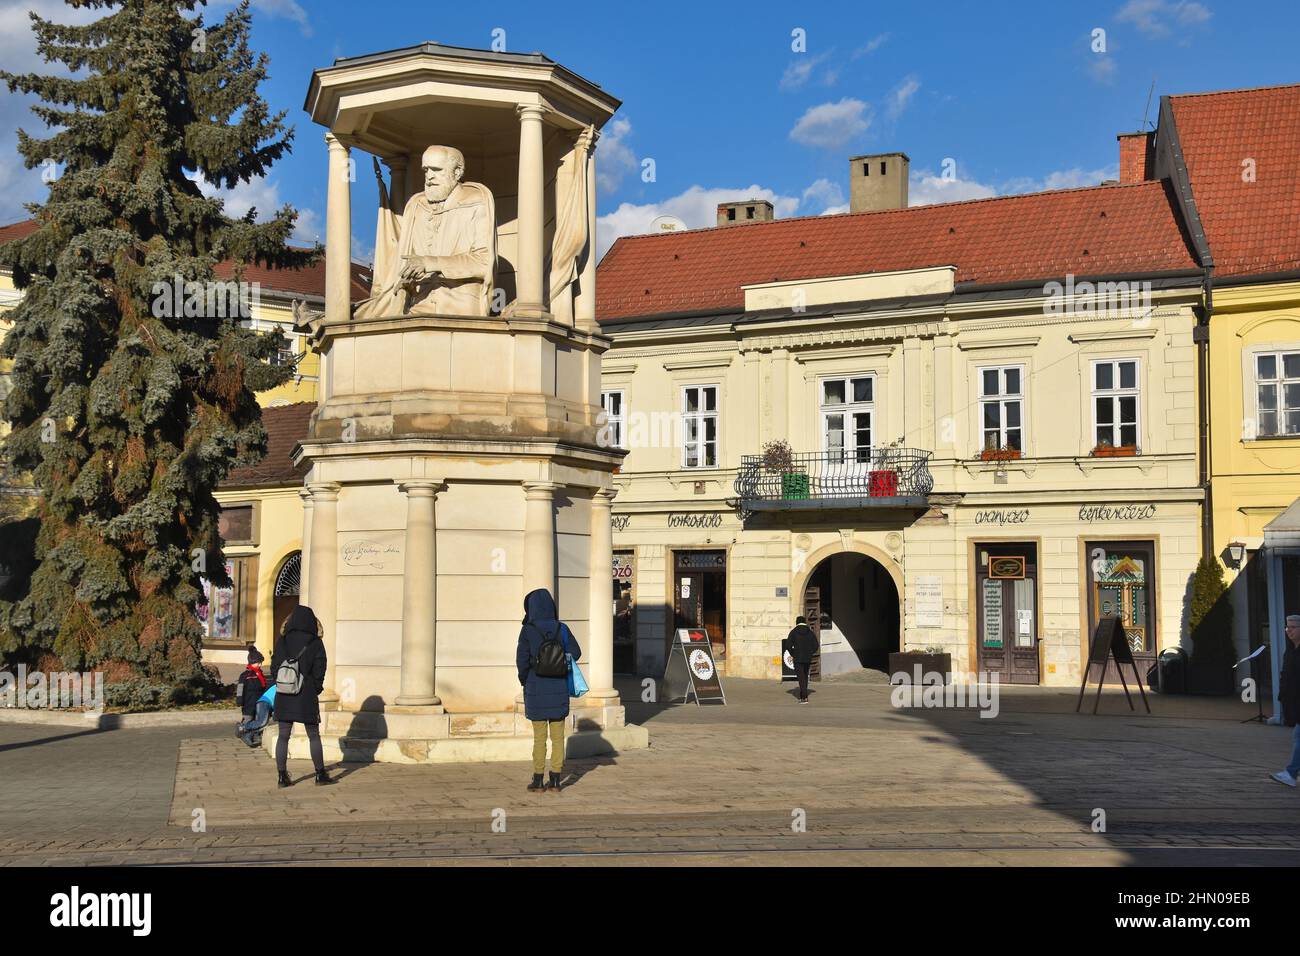 Miskolc, a large town in Northern Hungary: statue in the city center Stock Photo